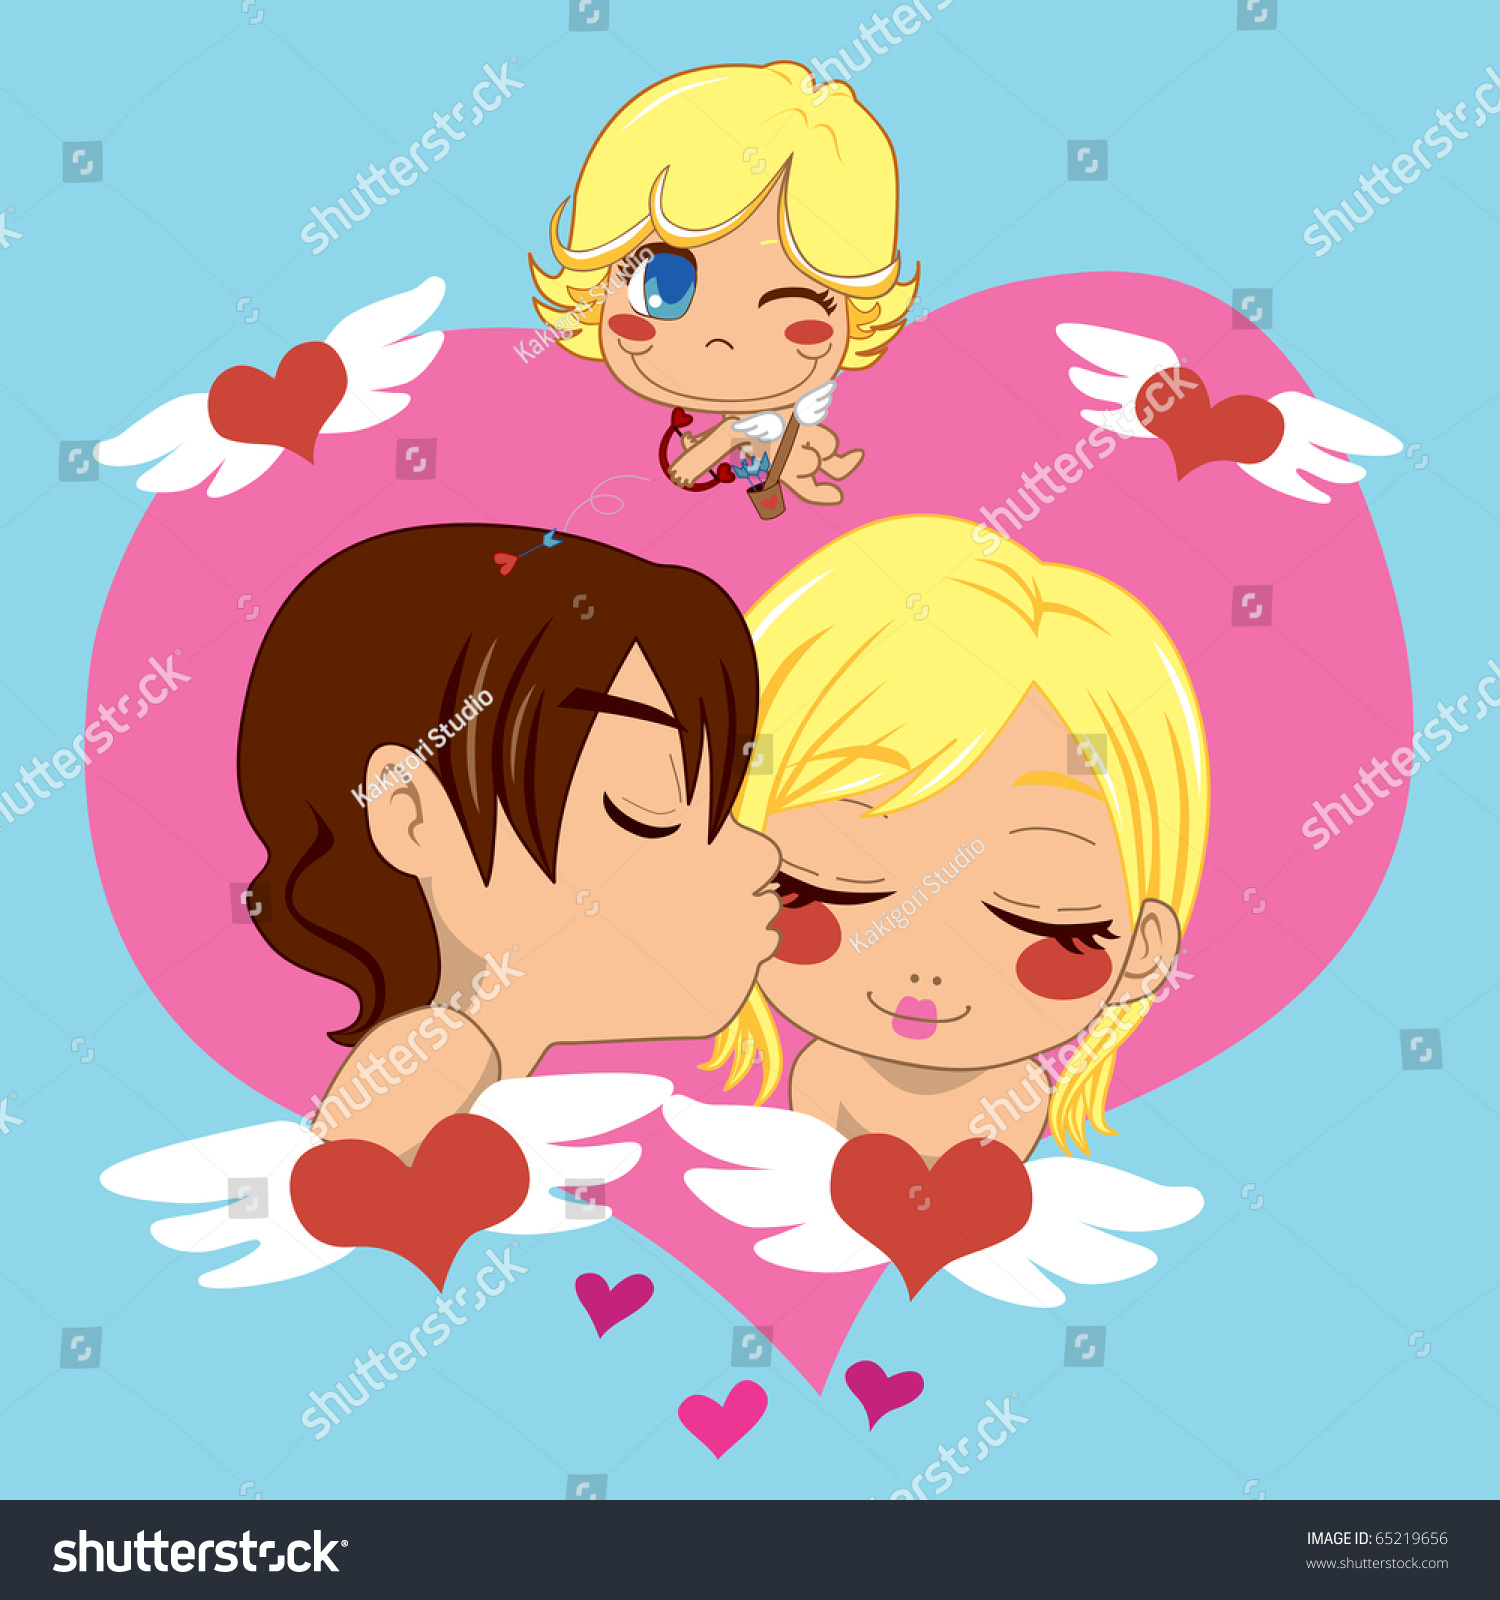 Boy In Love Kissing Girl In Valentines After Being Hit By Cupids Magic Arrows Of Passion 8024